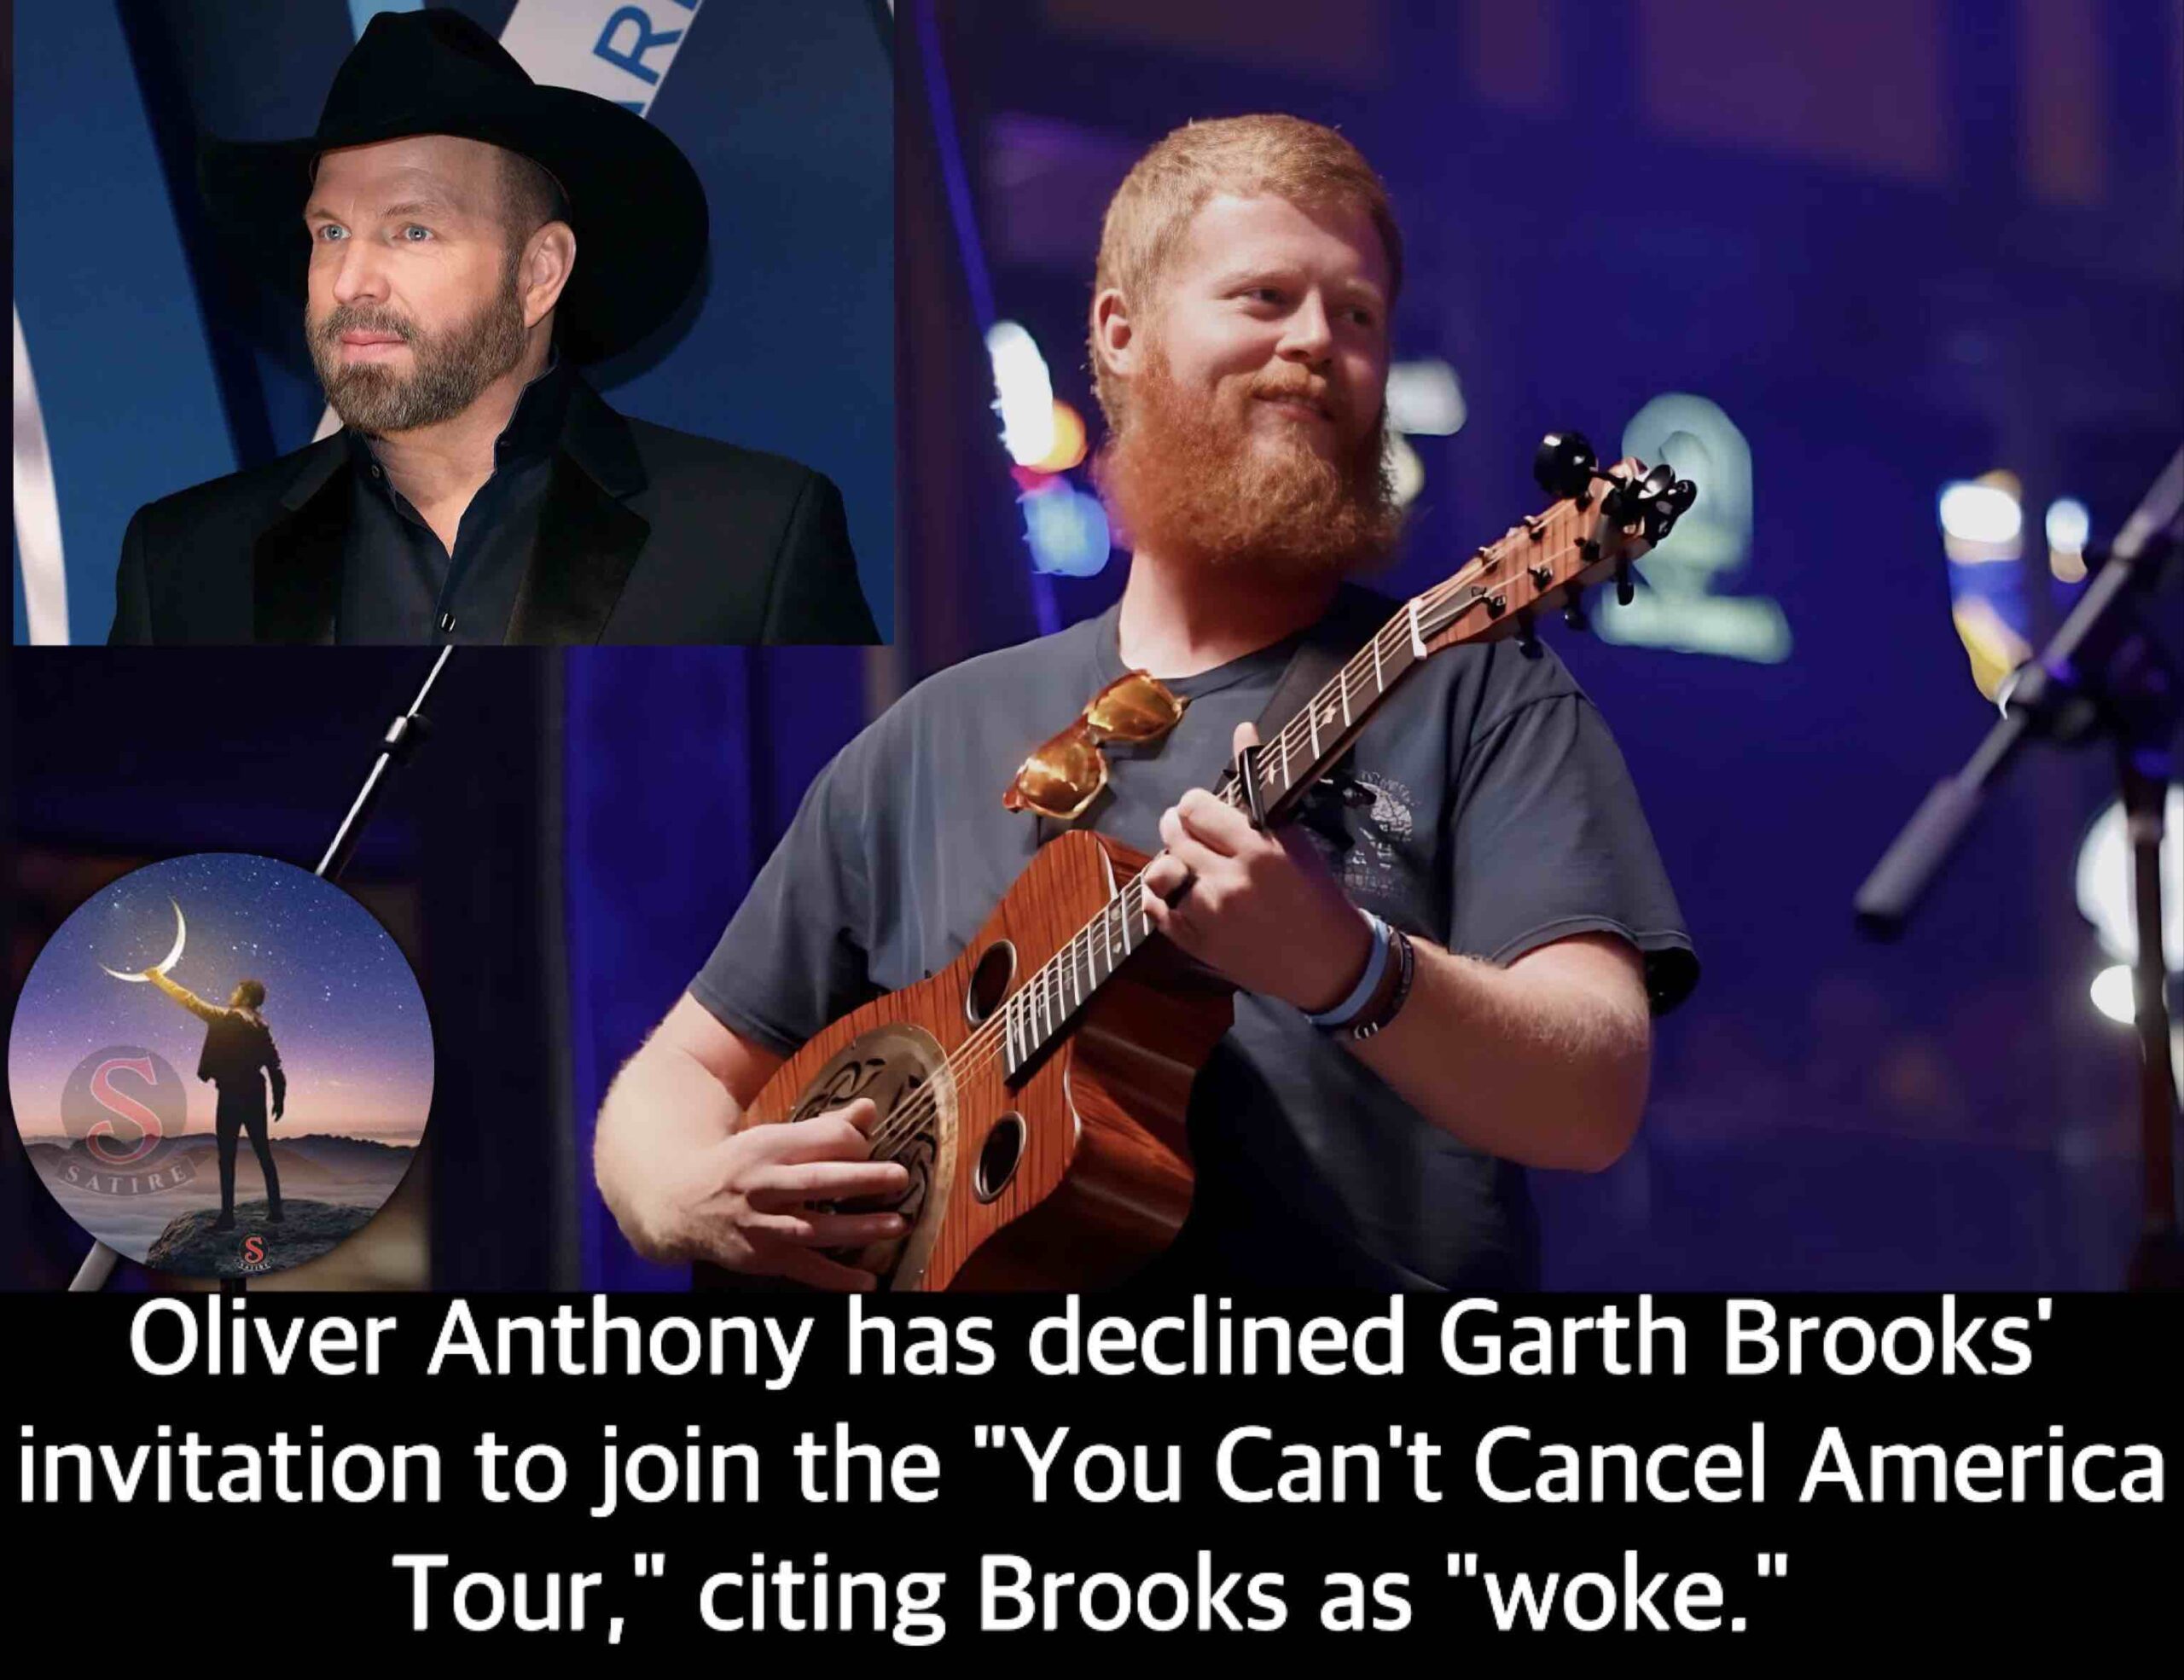 Oliver Anthony has declined Garth Brooks’ invitation to join the “You Can’t Cancel America Tour,” citing Brooks as “woke.”